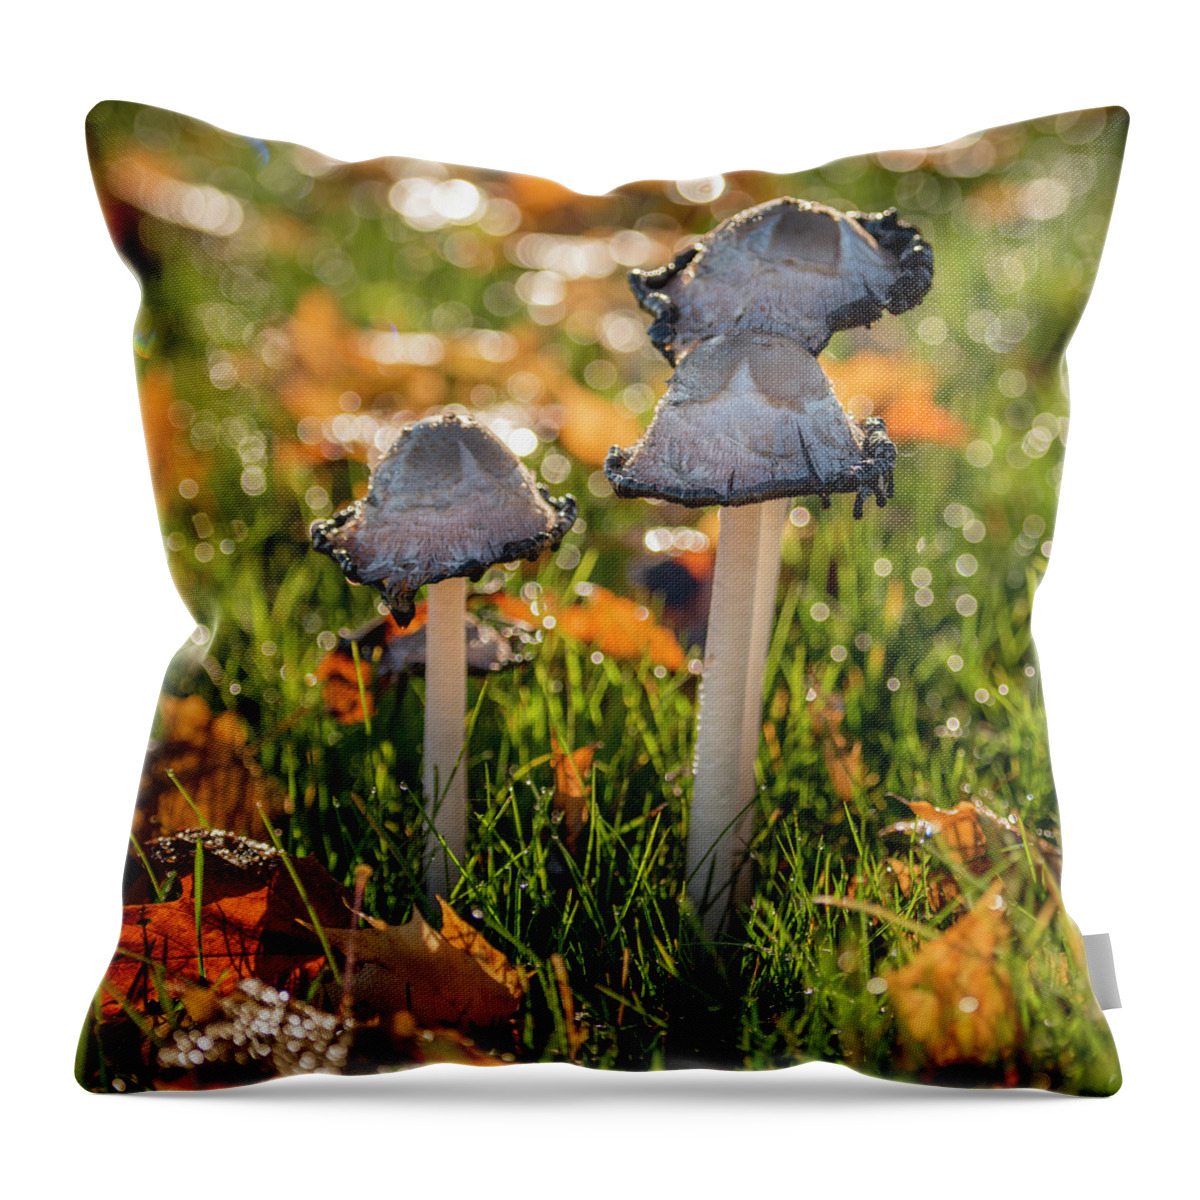 Mushroom Throw Pillow featuring the photograph Mushroom Square II by James Meyer